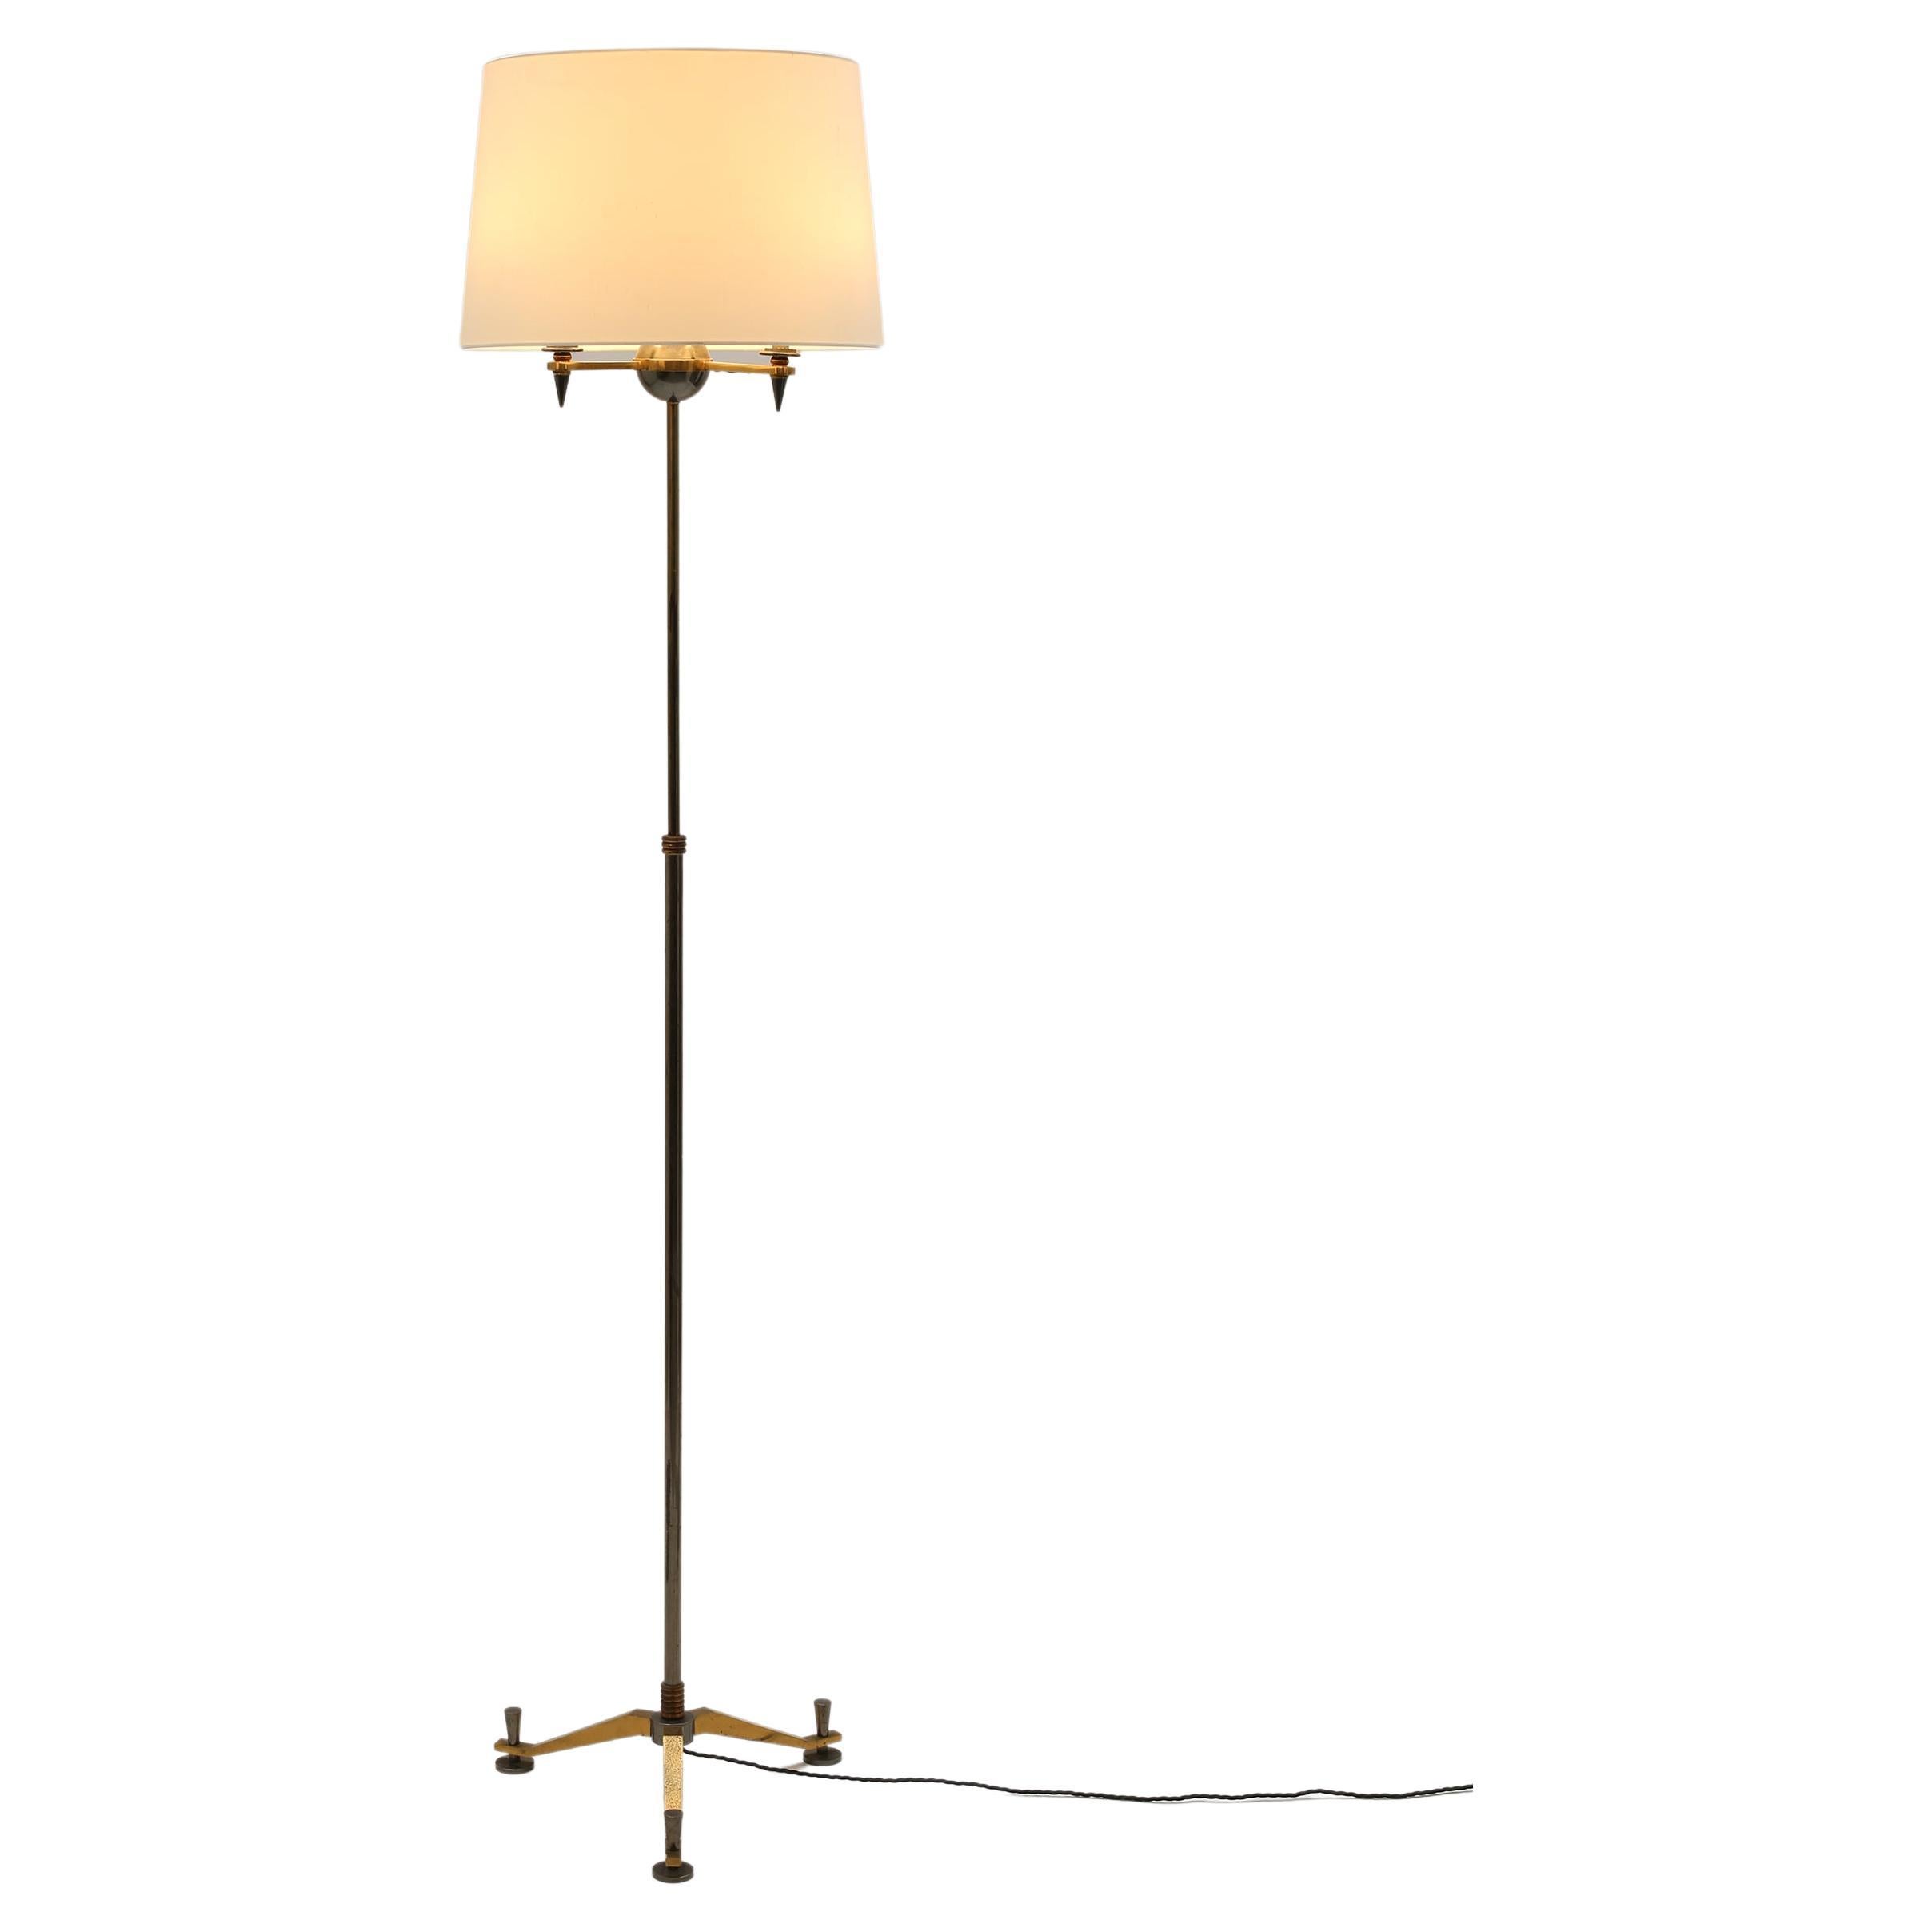 Neoclassical Floor Lamp by Henri Petitot for Atelier Petitot, French, c. 1930s